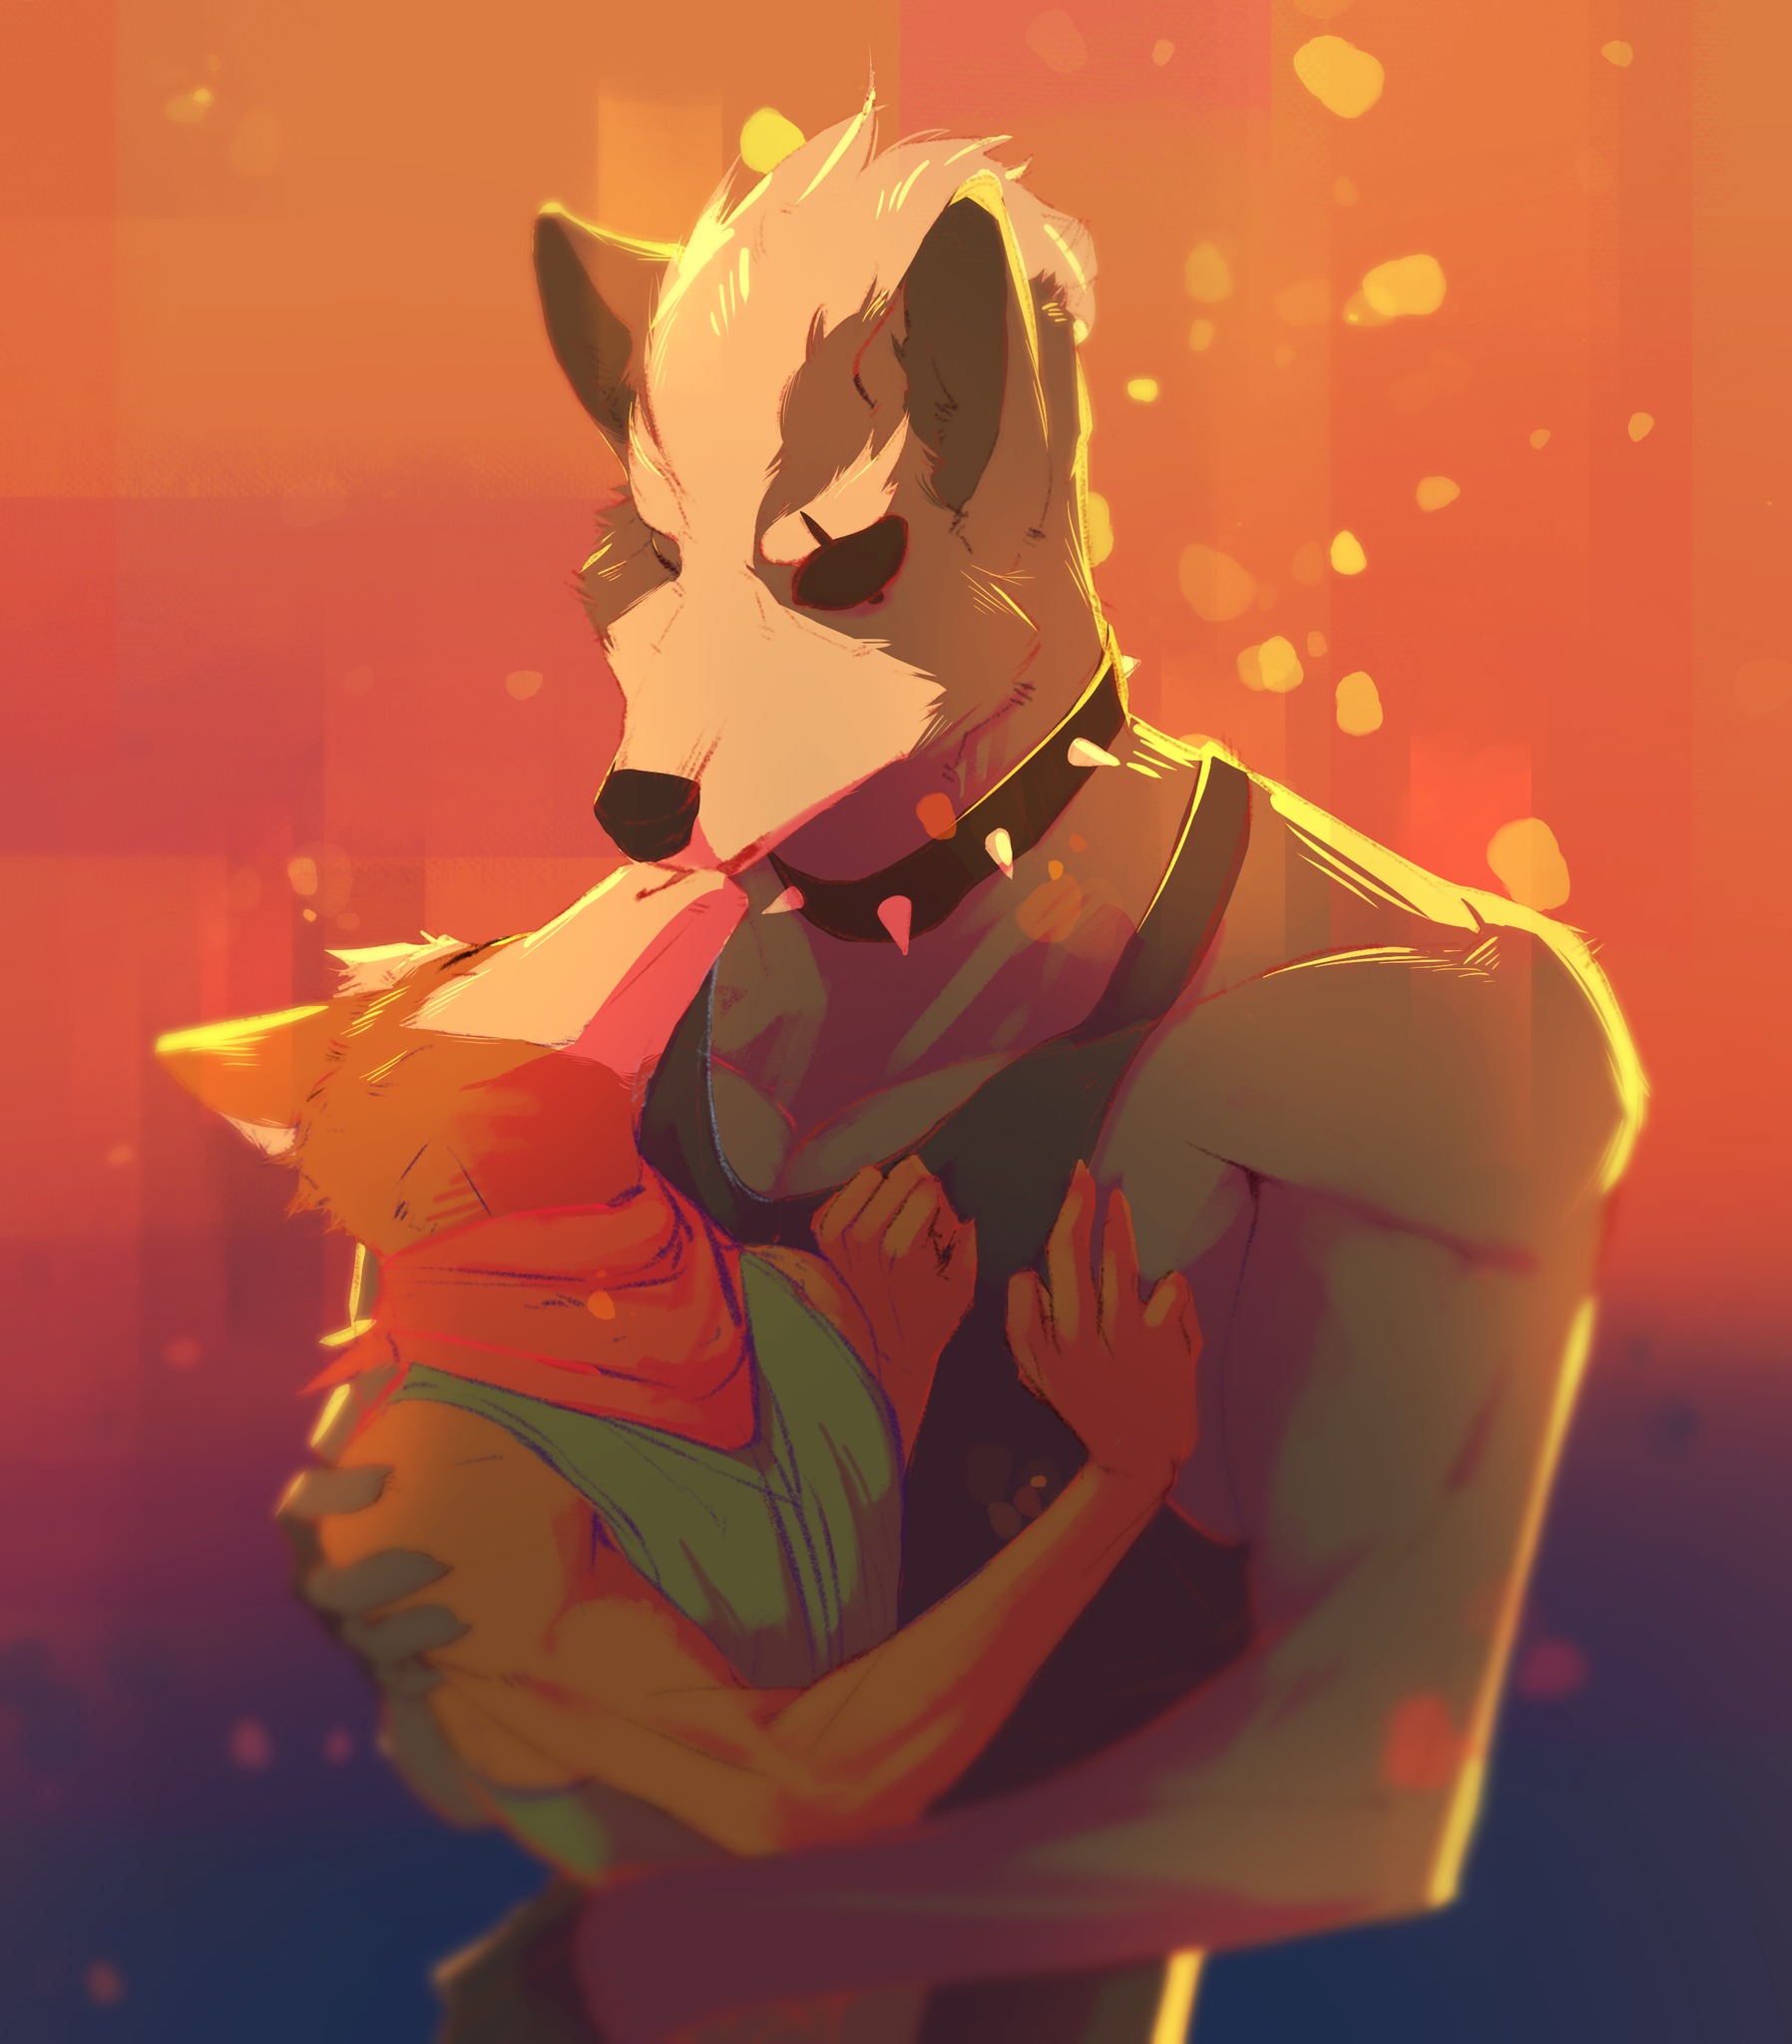 Fox mccloud x wolf o donnell